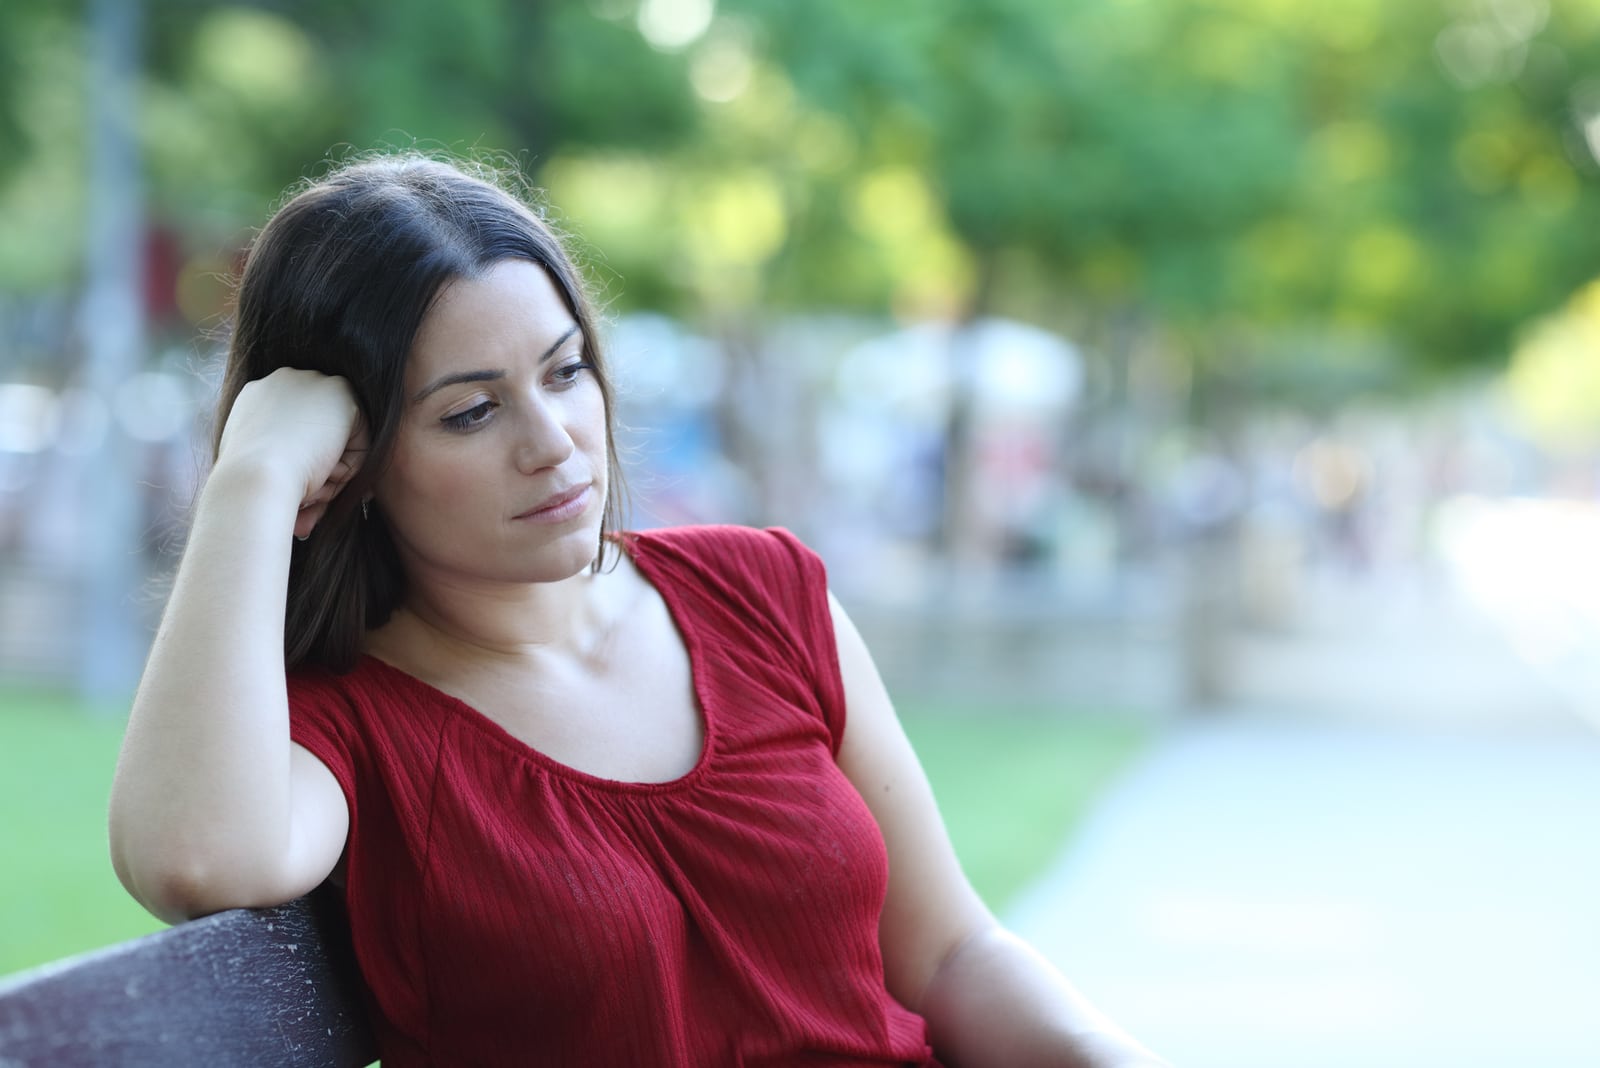 pensive woman wearing red t shirt sitting on the bench in park